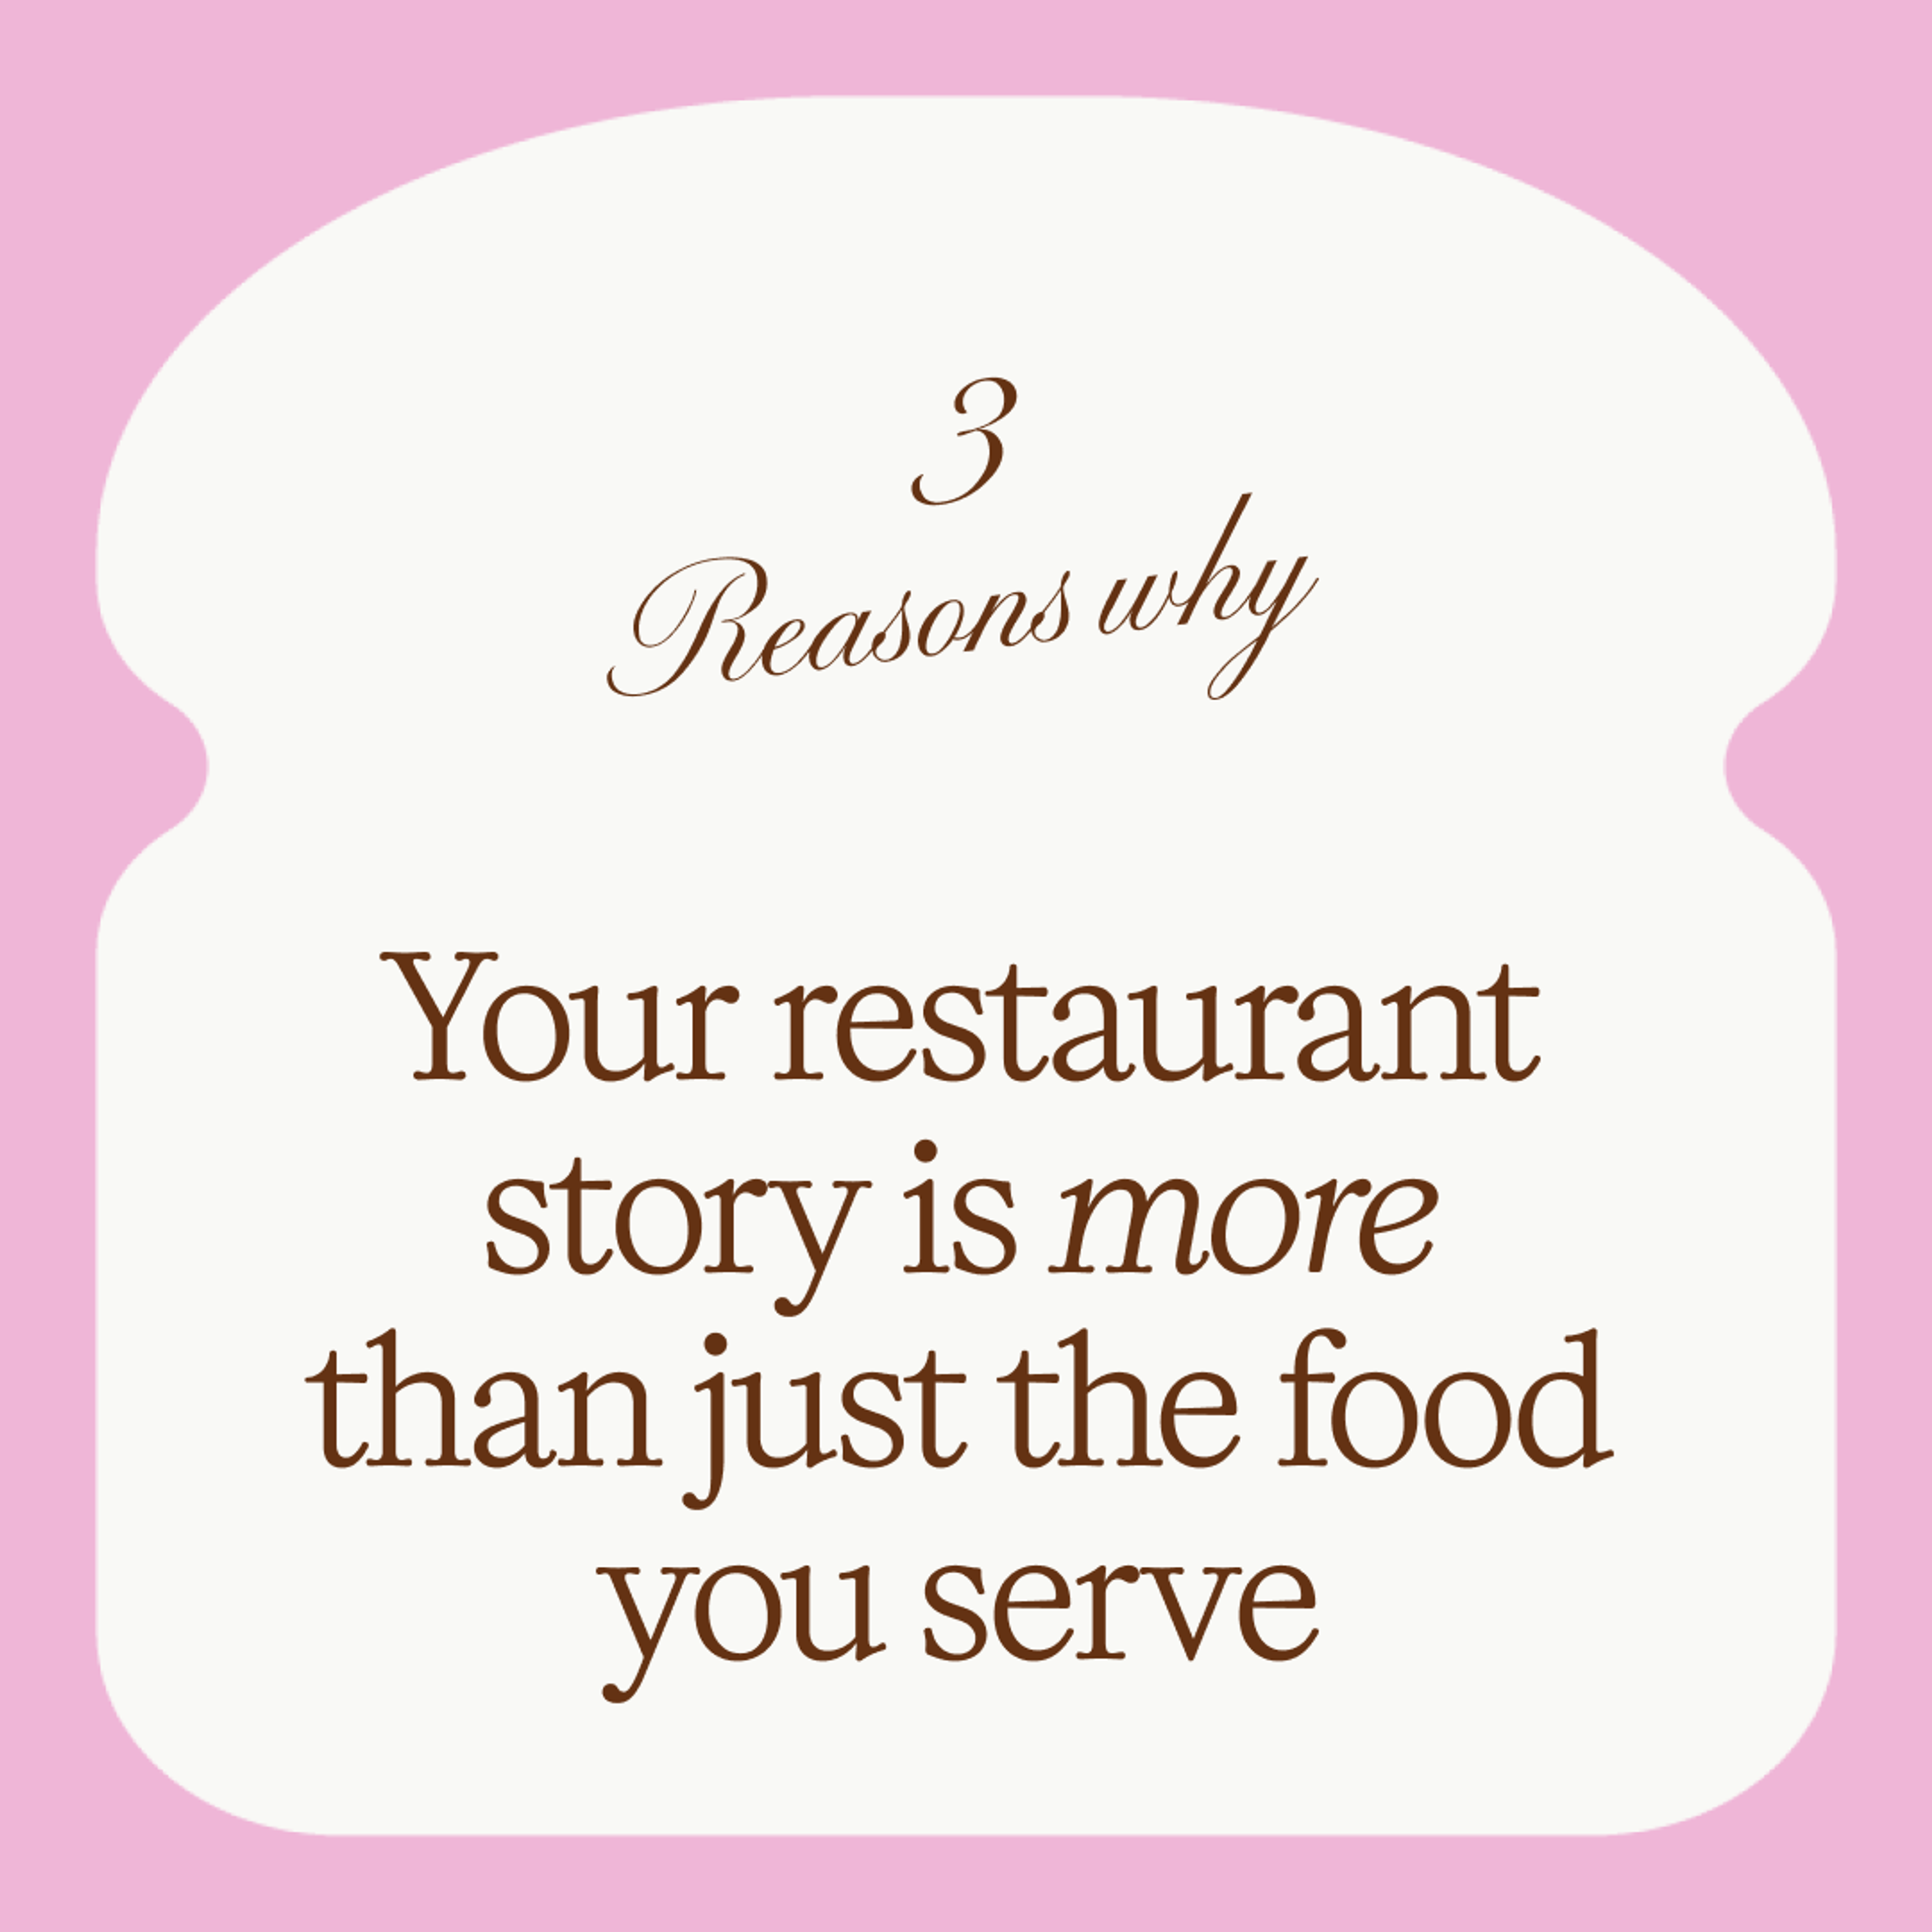 Your restaurant story is more than just the food you serve Instagram cover